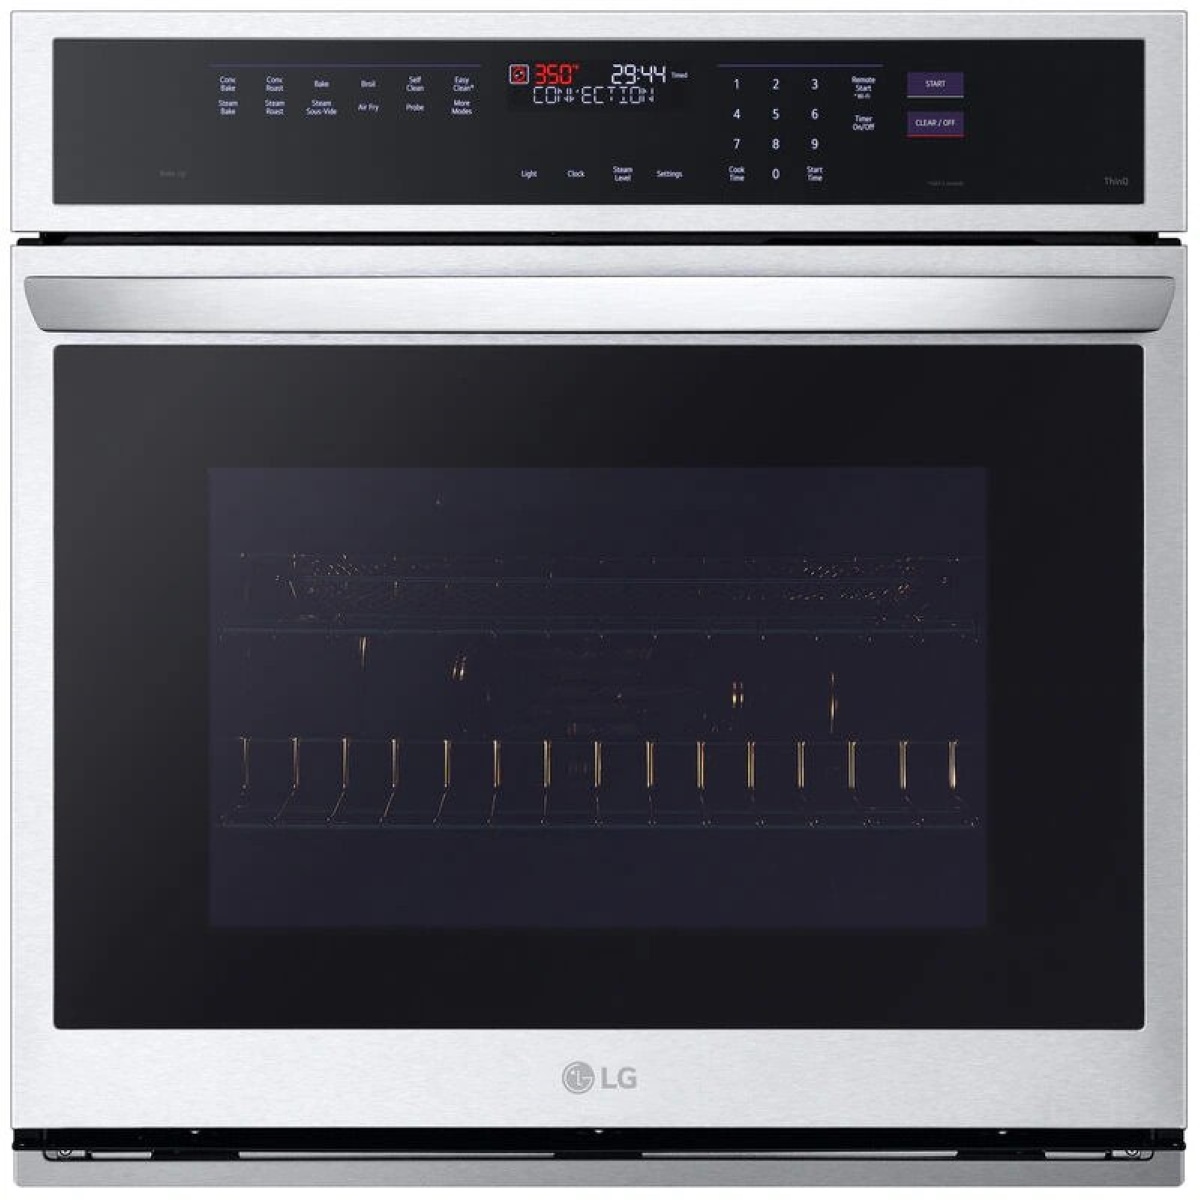 How To Fix The Error Code F-40 For LG Oven